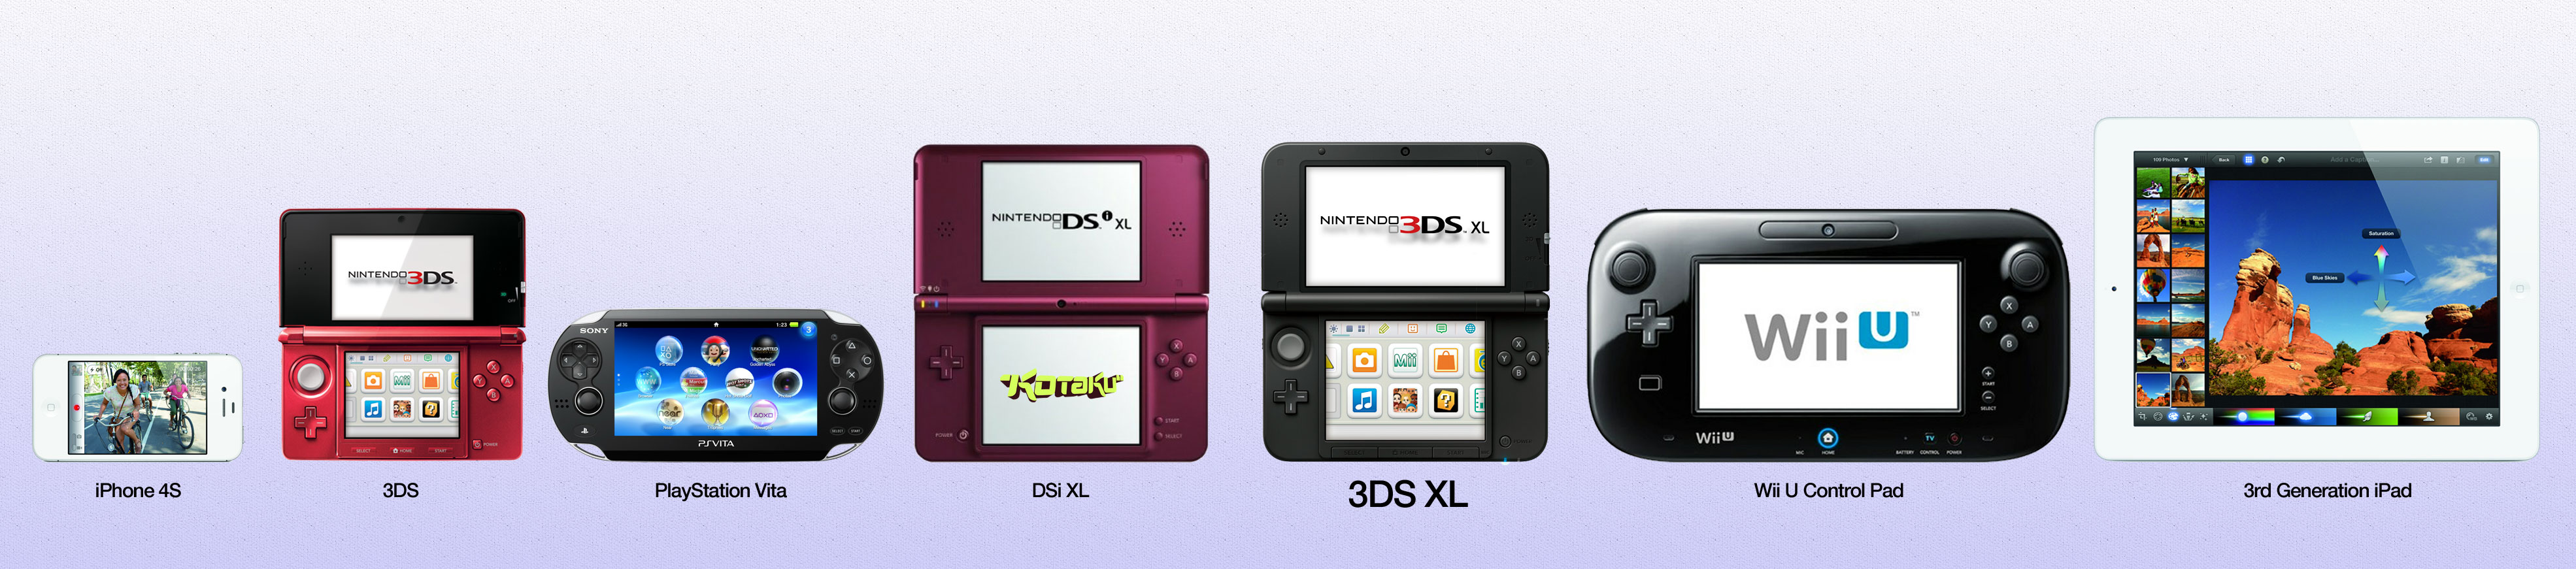 new 3ds xl dimensions